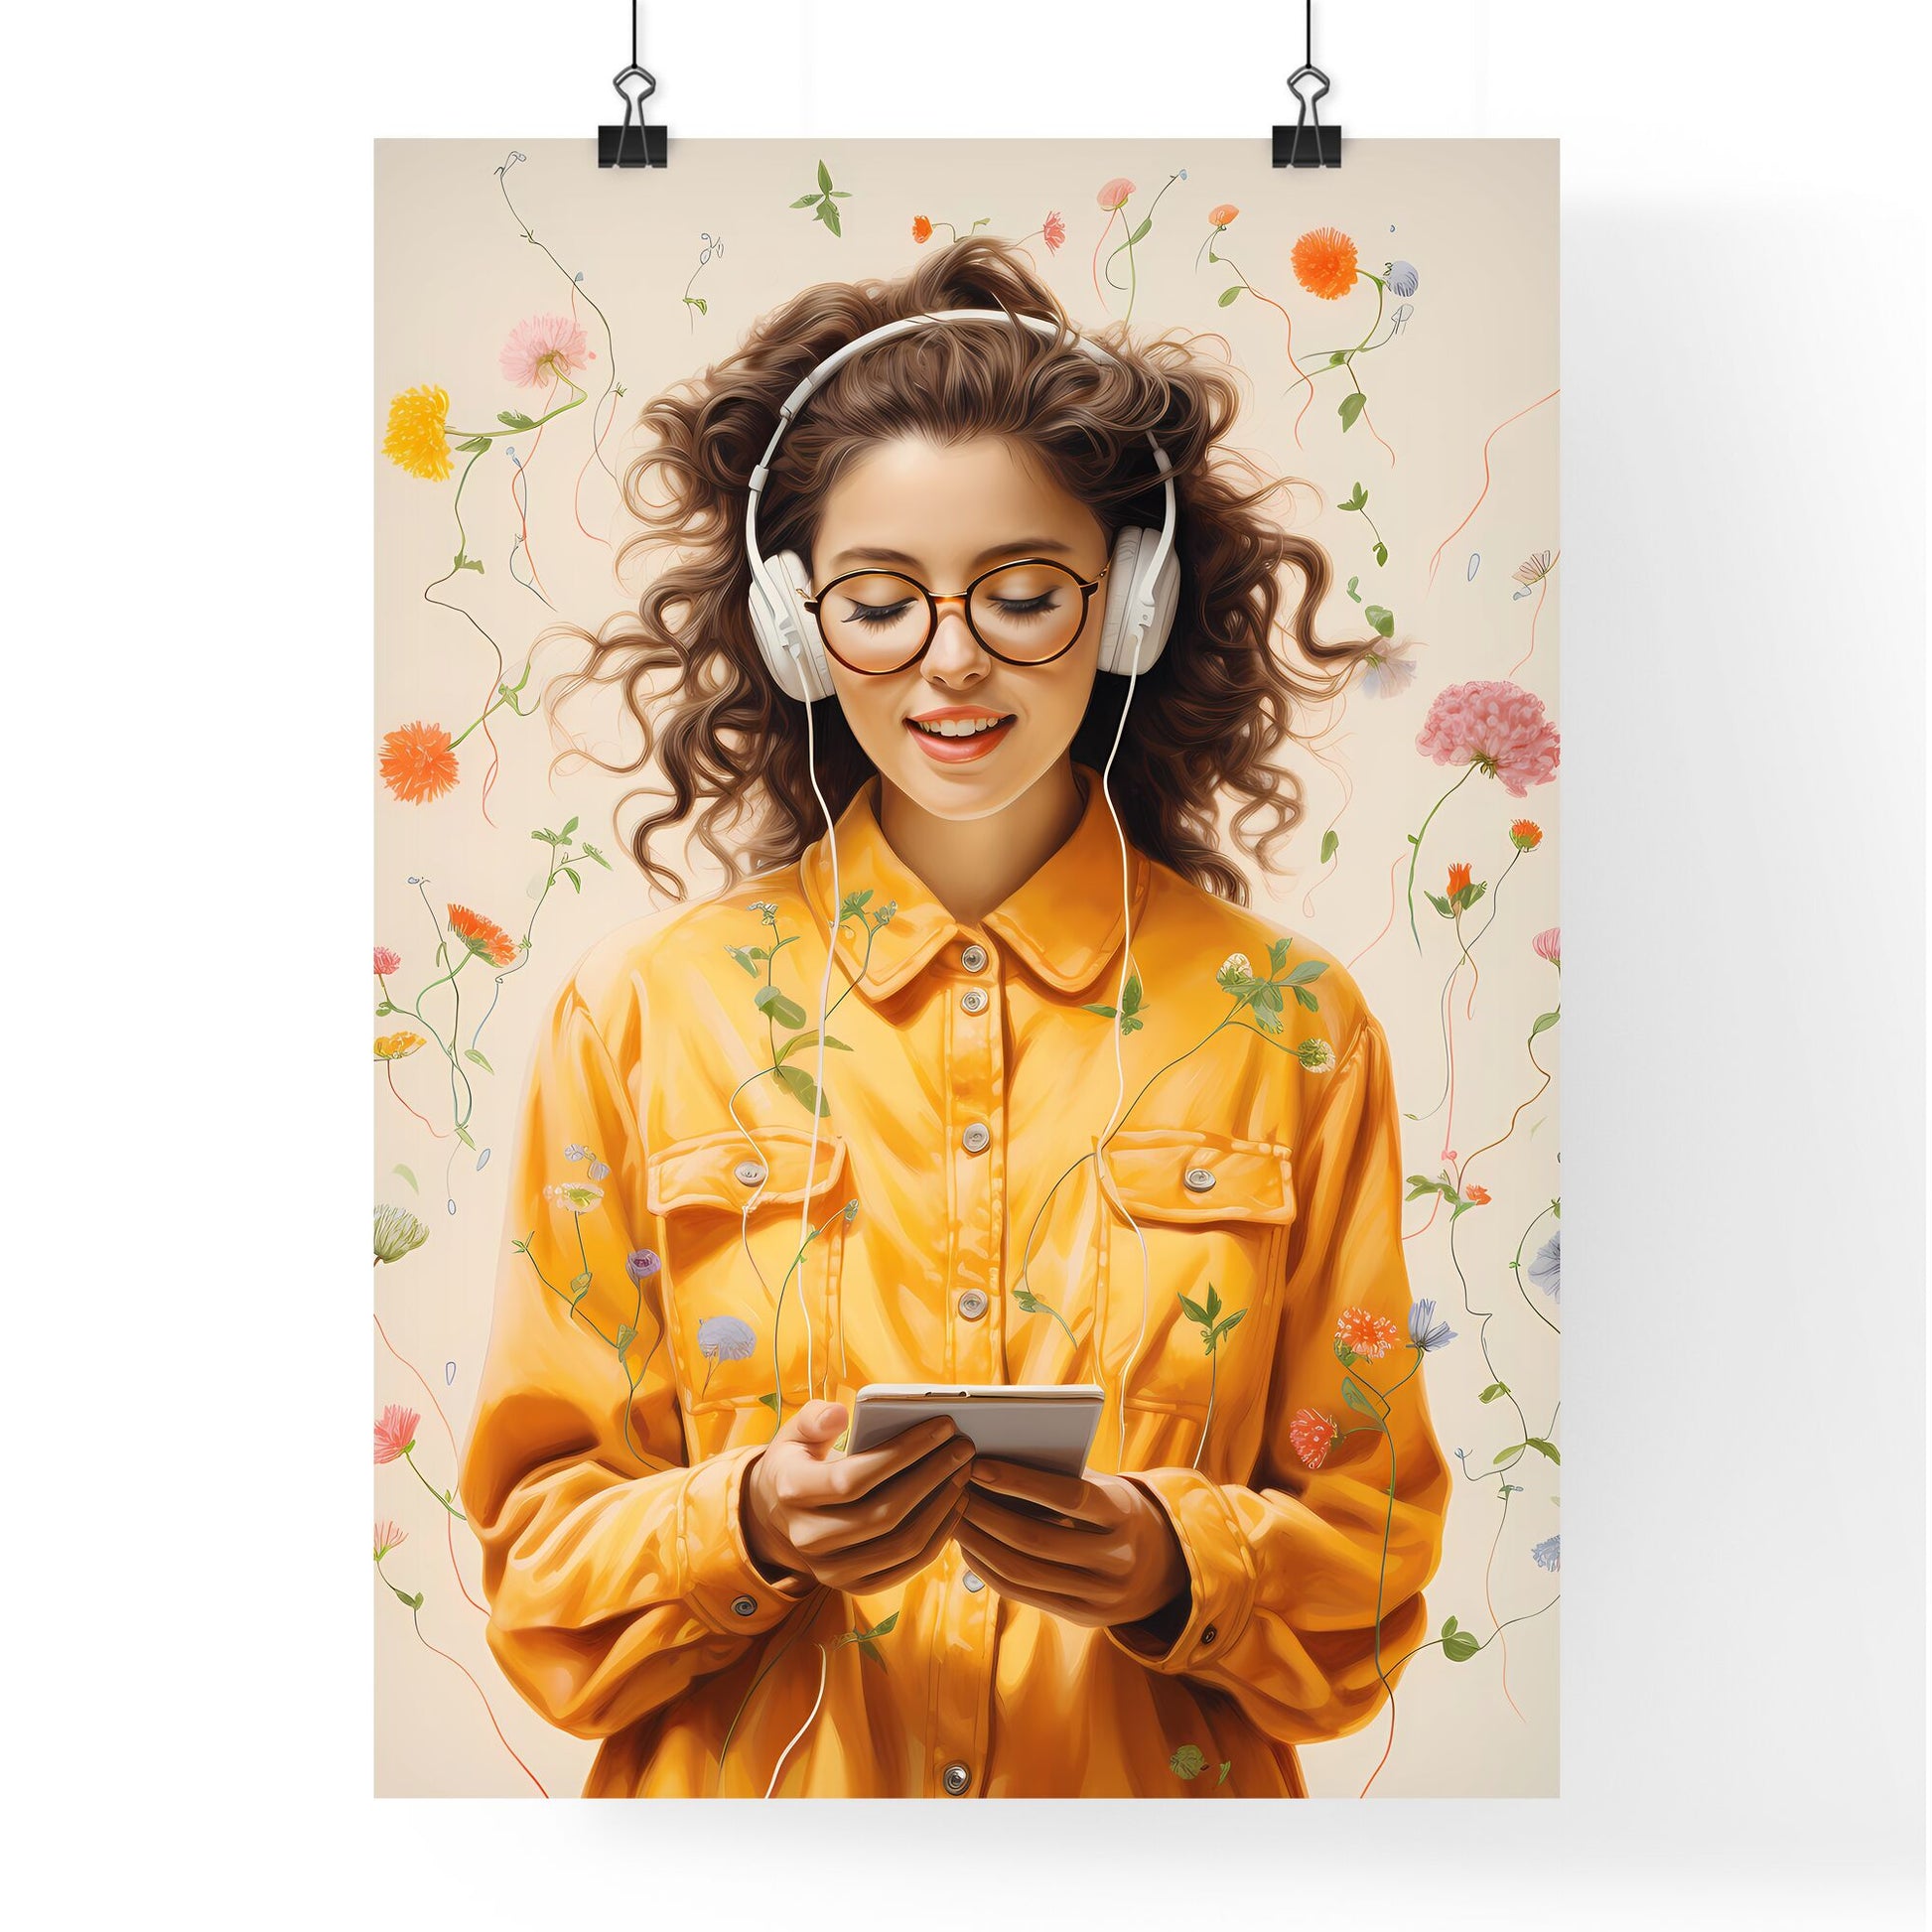 Sweat it out! - Art print of a woman wearing headphones and holding a phone Default Title